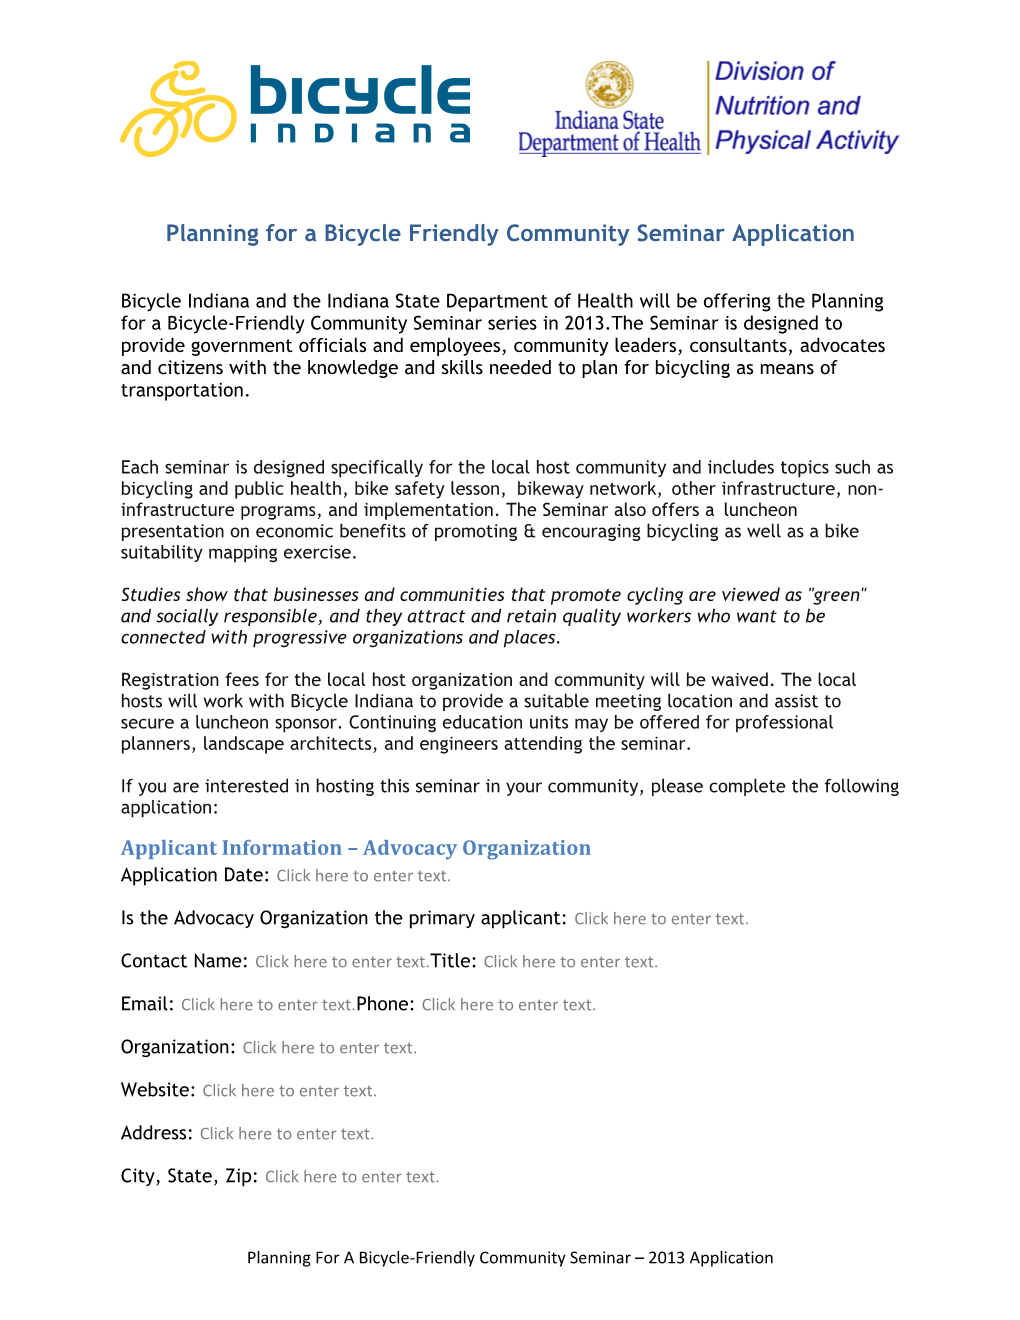 Planning for a Bicycle Friendly Community Seminar Application